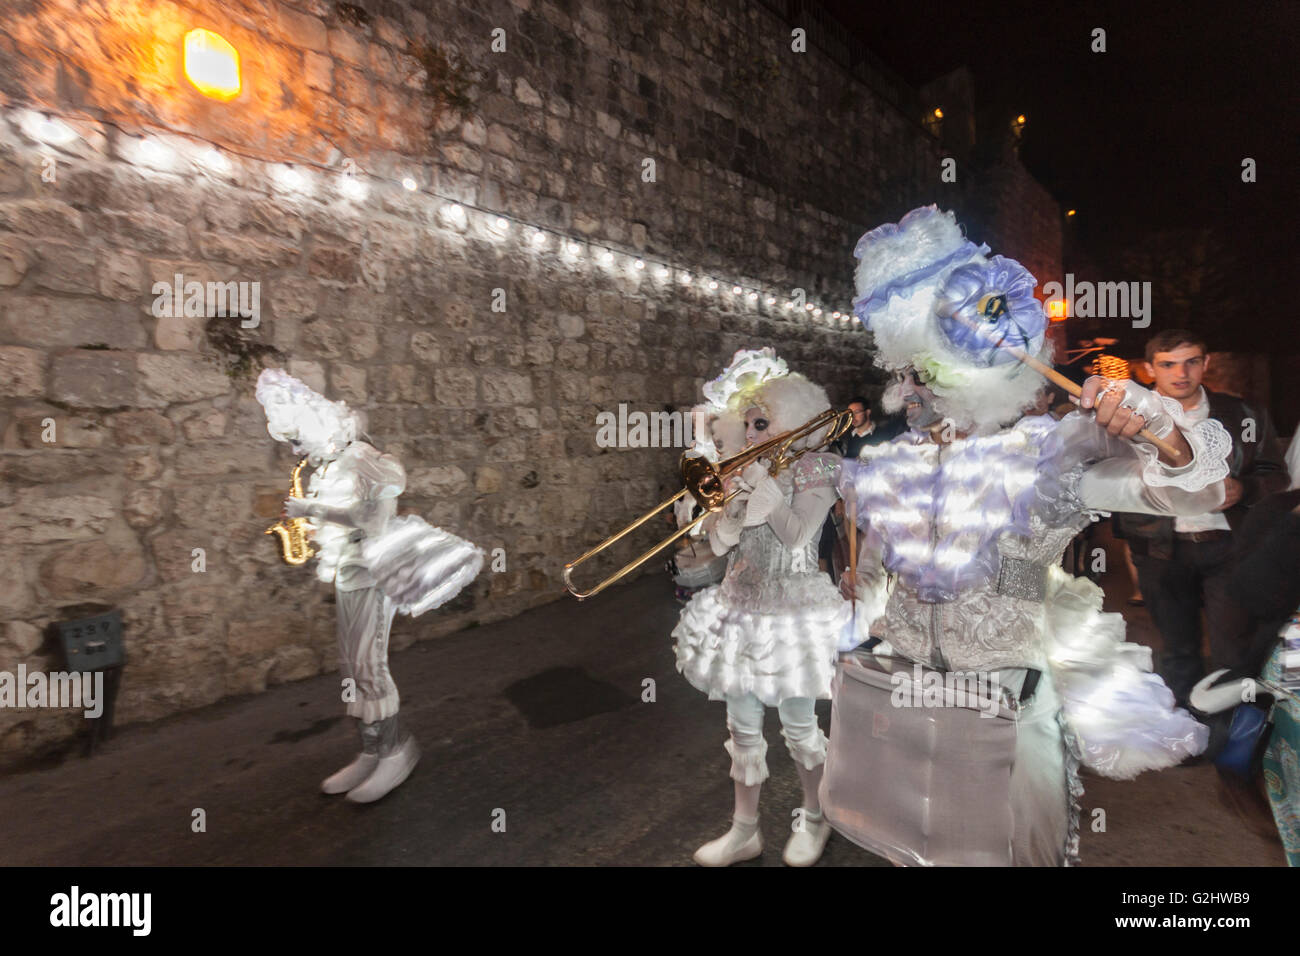 Jerusalem. 31st May, 2016. Pyromania Group's 'The Illuminated Orchestra' brass band, dressed with LED-lit clothes, play in the old city of Jerusalem during the 'Light in Jerusalem' festival, 2016 Credit:  Yagil Henkin/Alamy Live News Stock Photo